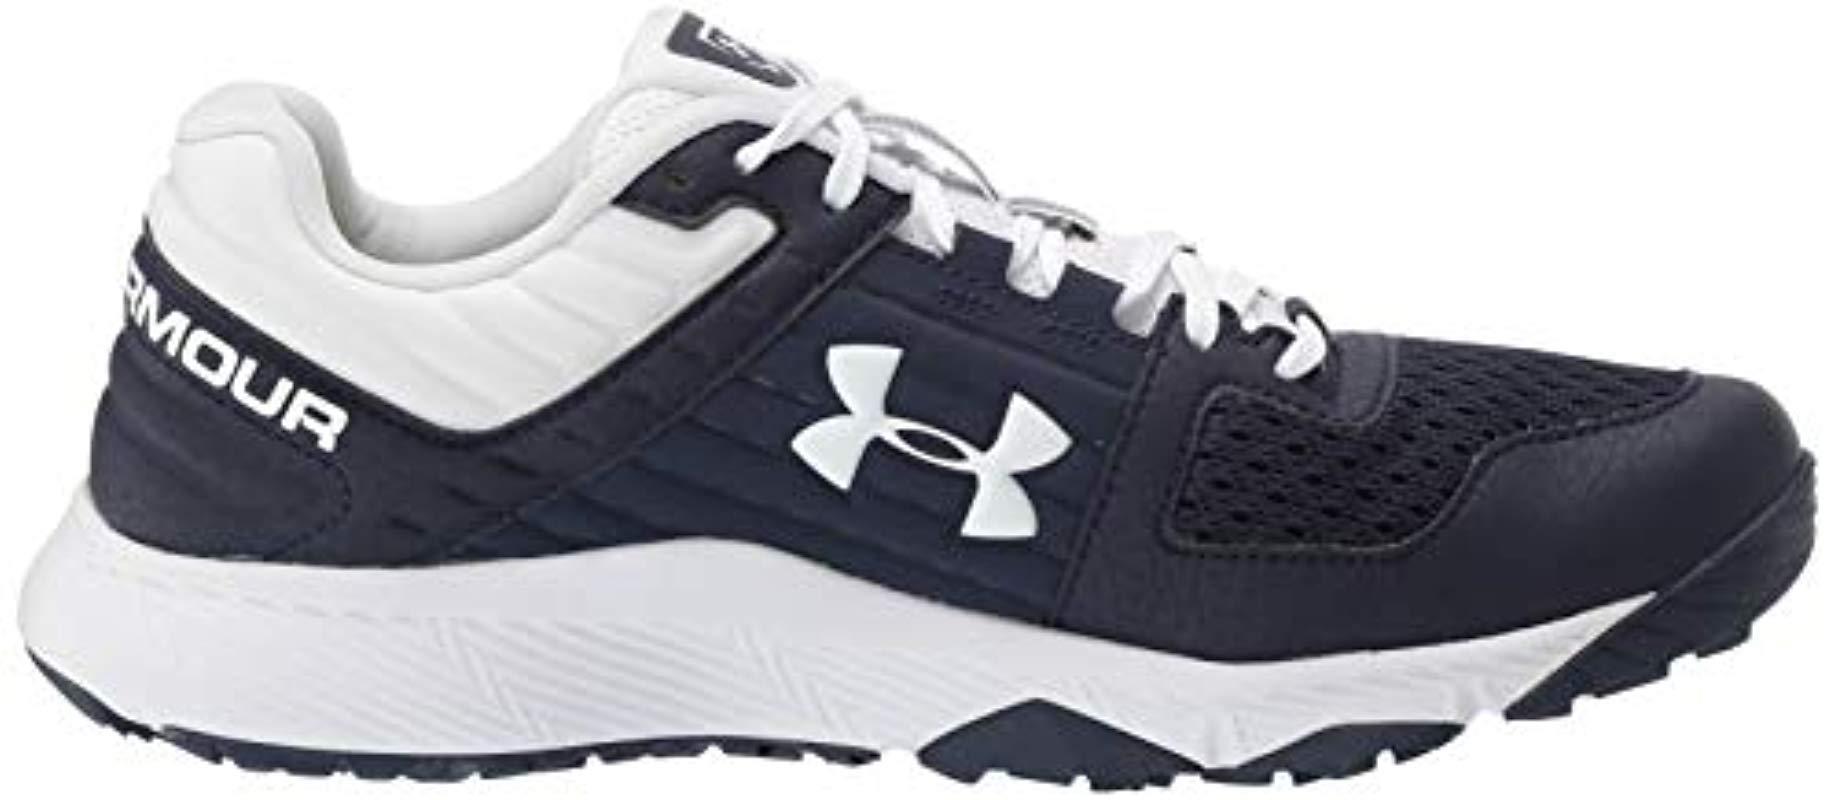 Under Armour UA Yard Low Trainer Men’s Shoes Black White New 